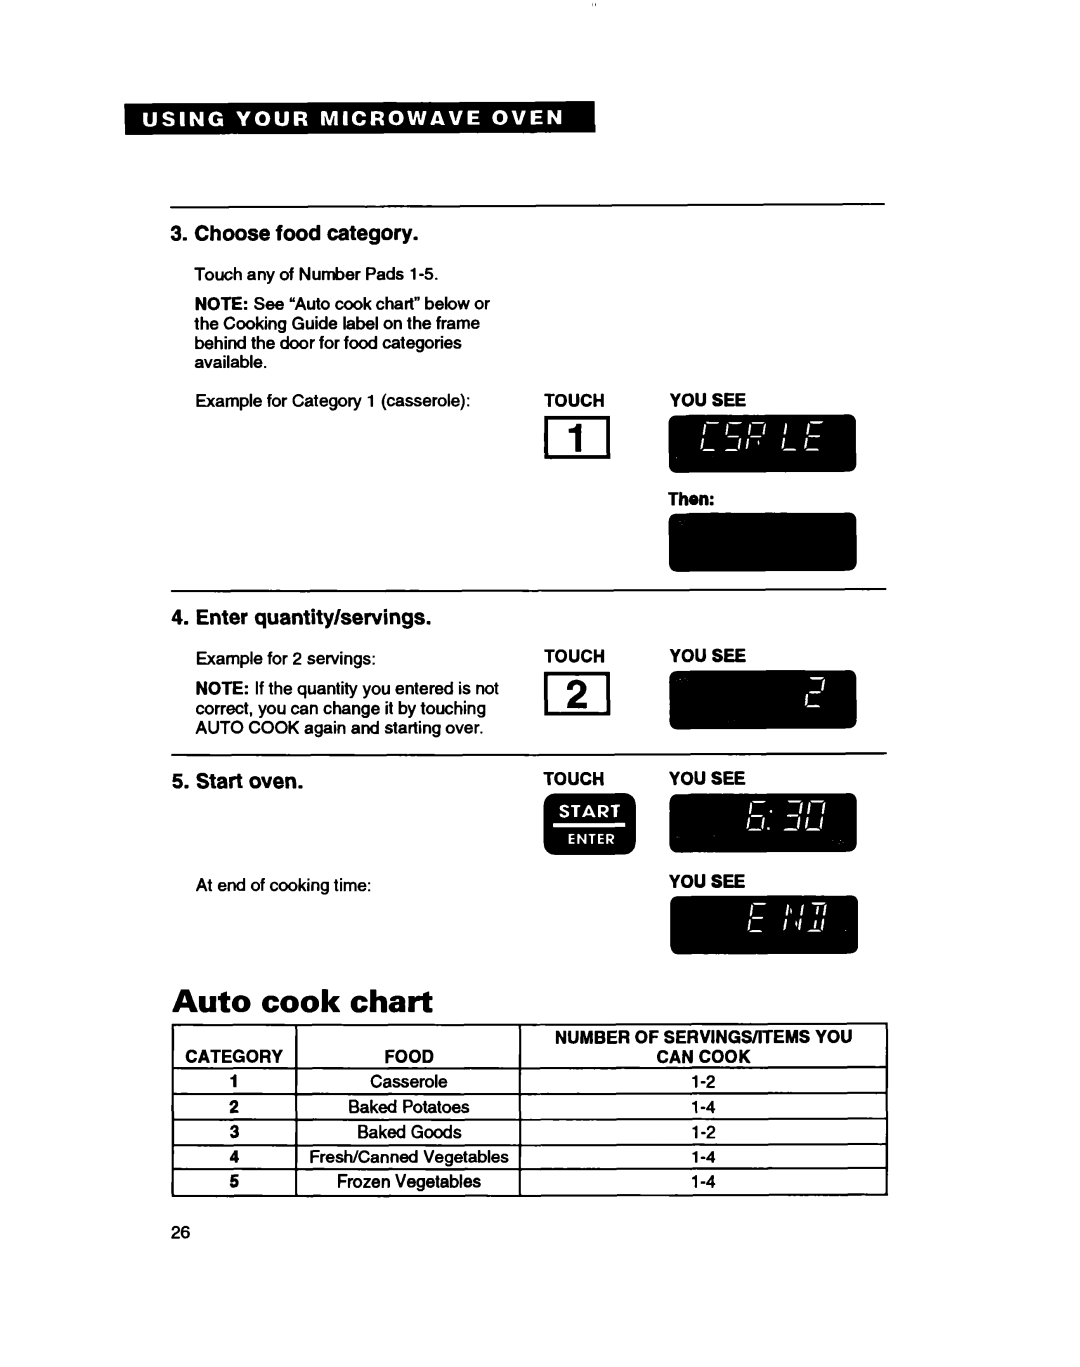 Whirlpool MH7110XB warranty cook chart, Choose food category, Enter quantity/servings, Auto, Start oven 